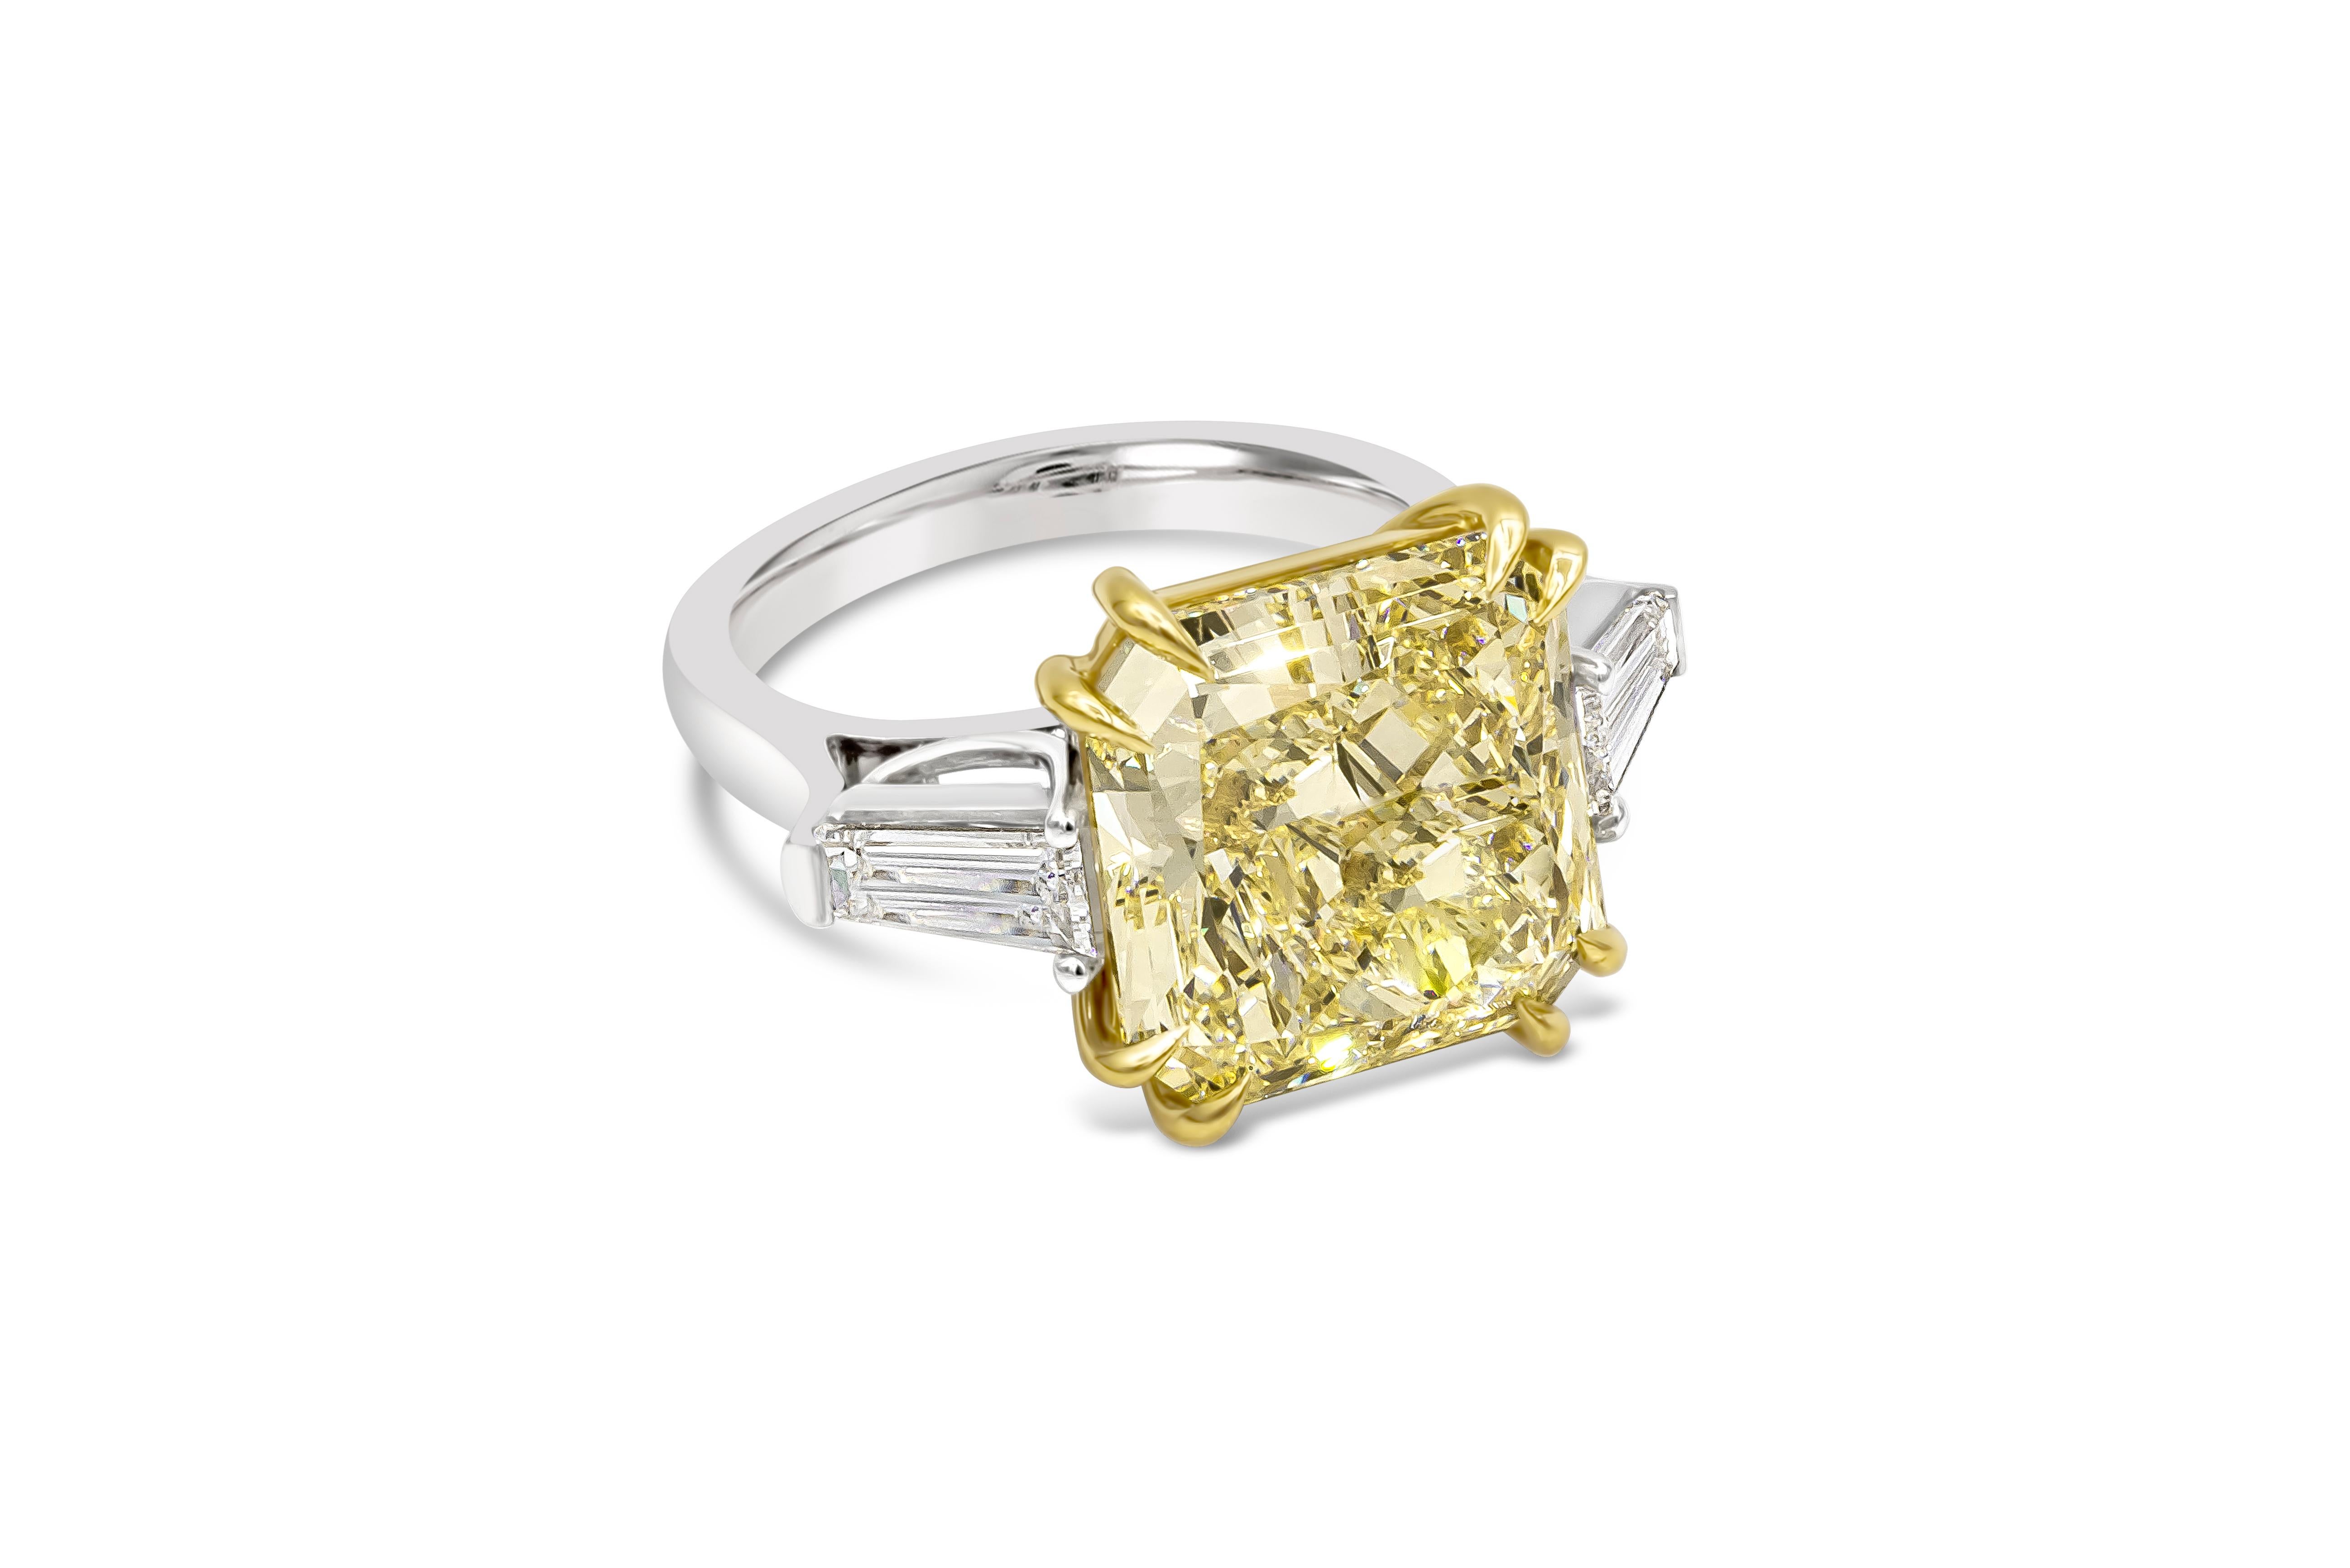 Elegantly made three stone engagement ring showcasing a color rich 10.11 carat radiant cut diamond certified by GIA as fancy light yellow, SI1 clarity, set in a eight prong 18k yellow gold basket. Flanking the center stone are tapered baguette side